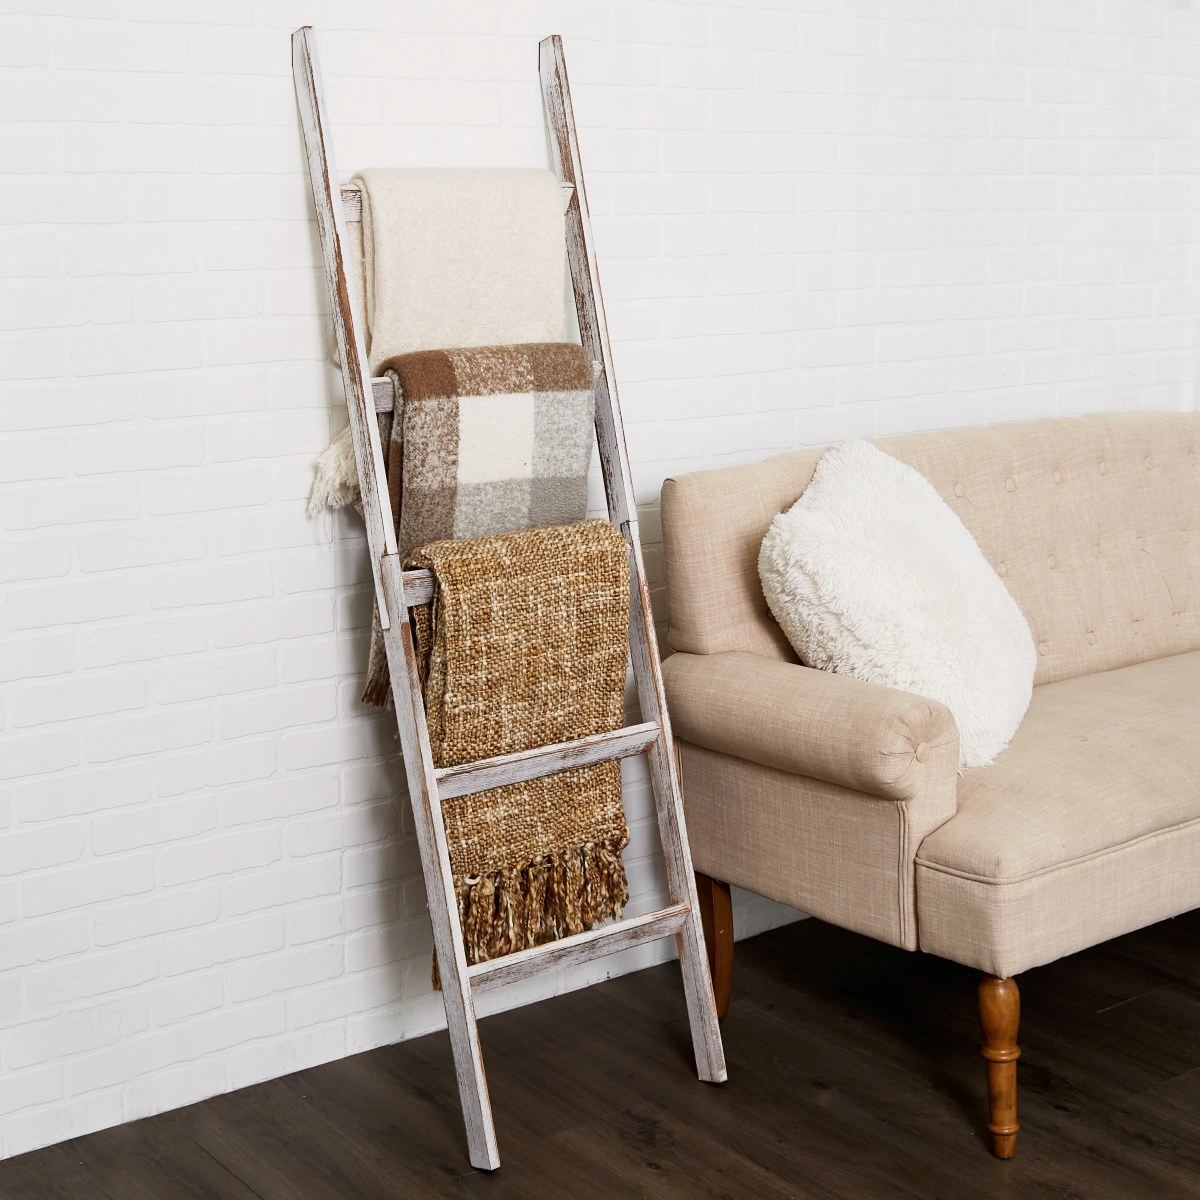 How To Use Blanket Ladder